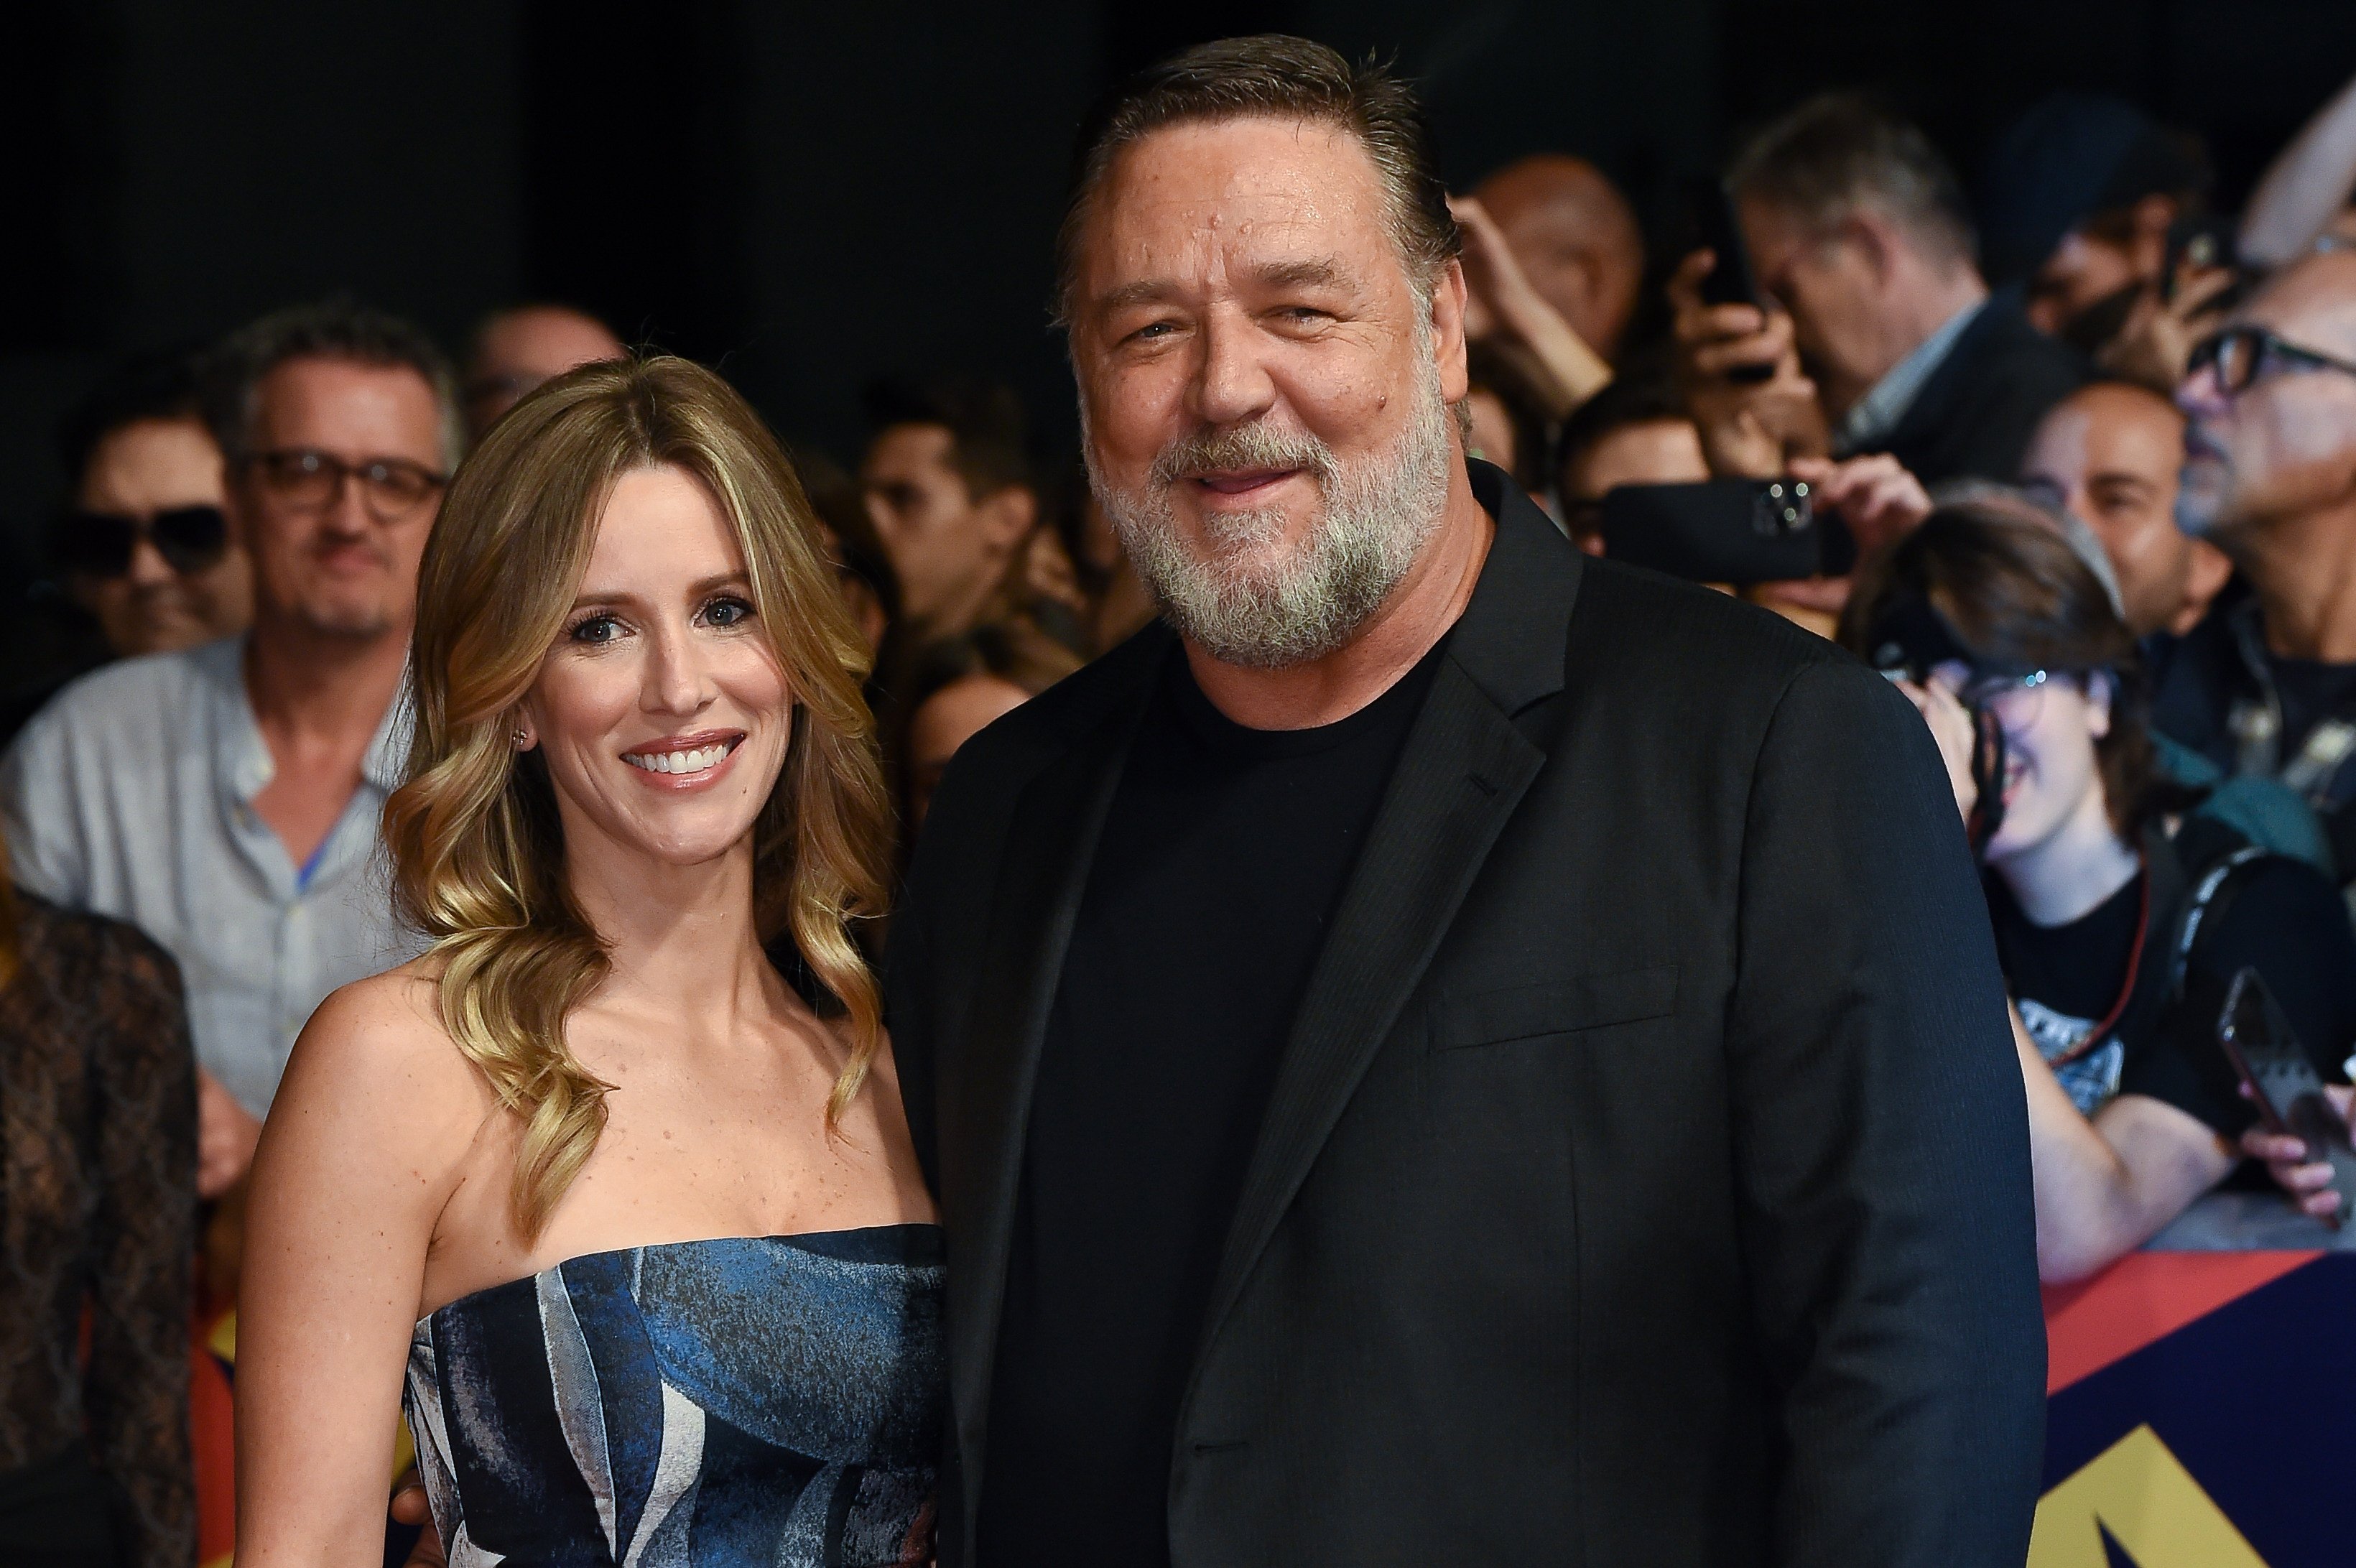 Hollywood star Russell Crowe and his fiancée, Britney Theriot, have a 28-year age gap. Photo: Getty Images